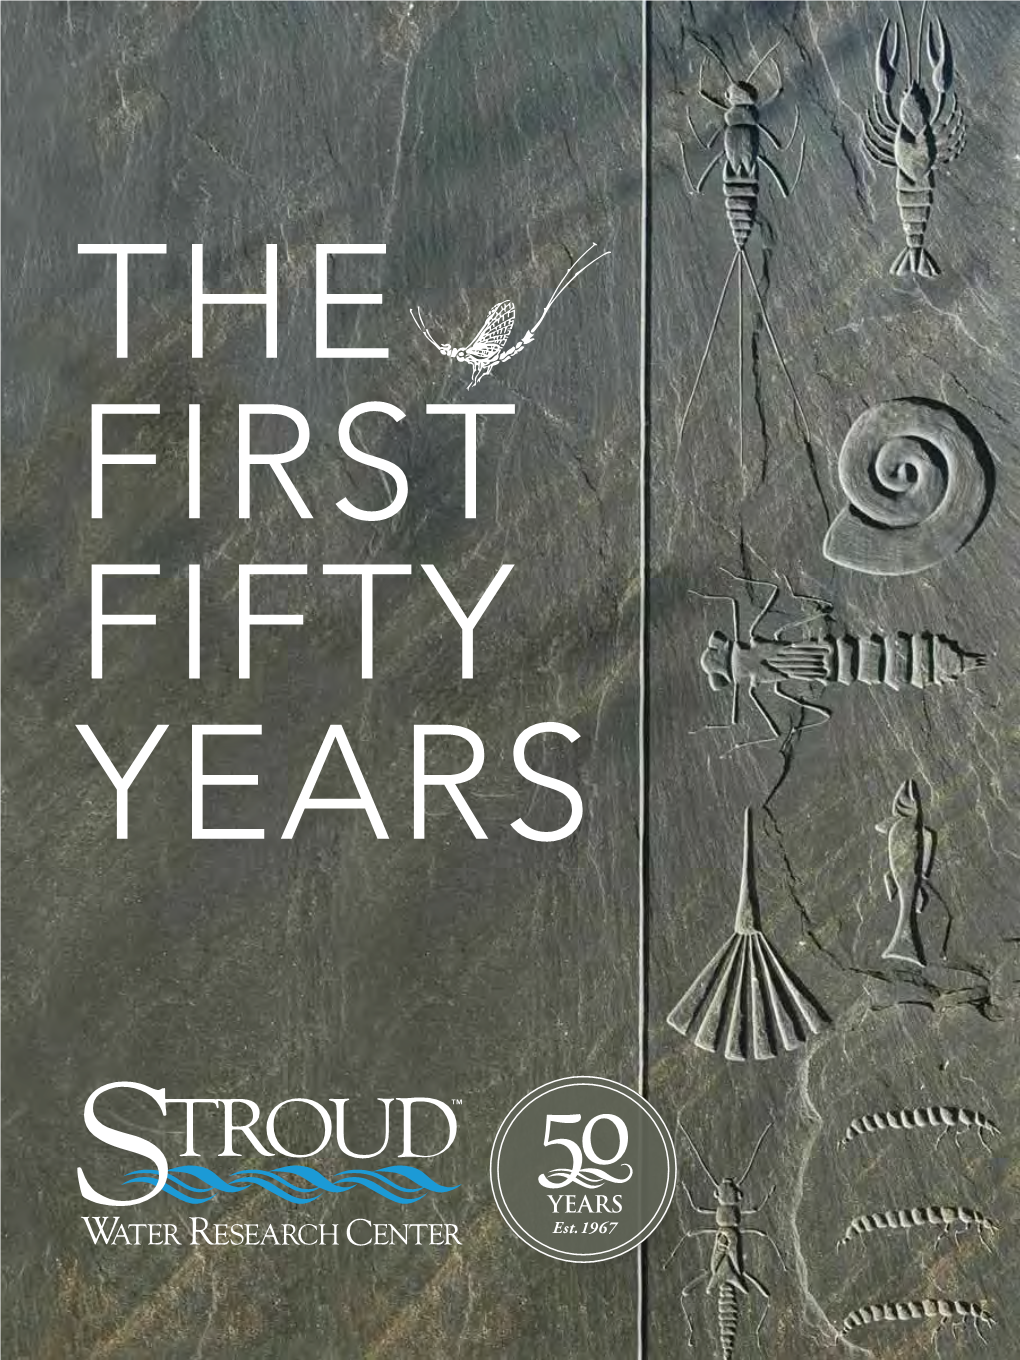 THE FIRST FIFTY YEARS KEEPING IT FRESH for FIFTY YEARS Table of Contents